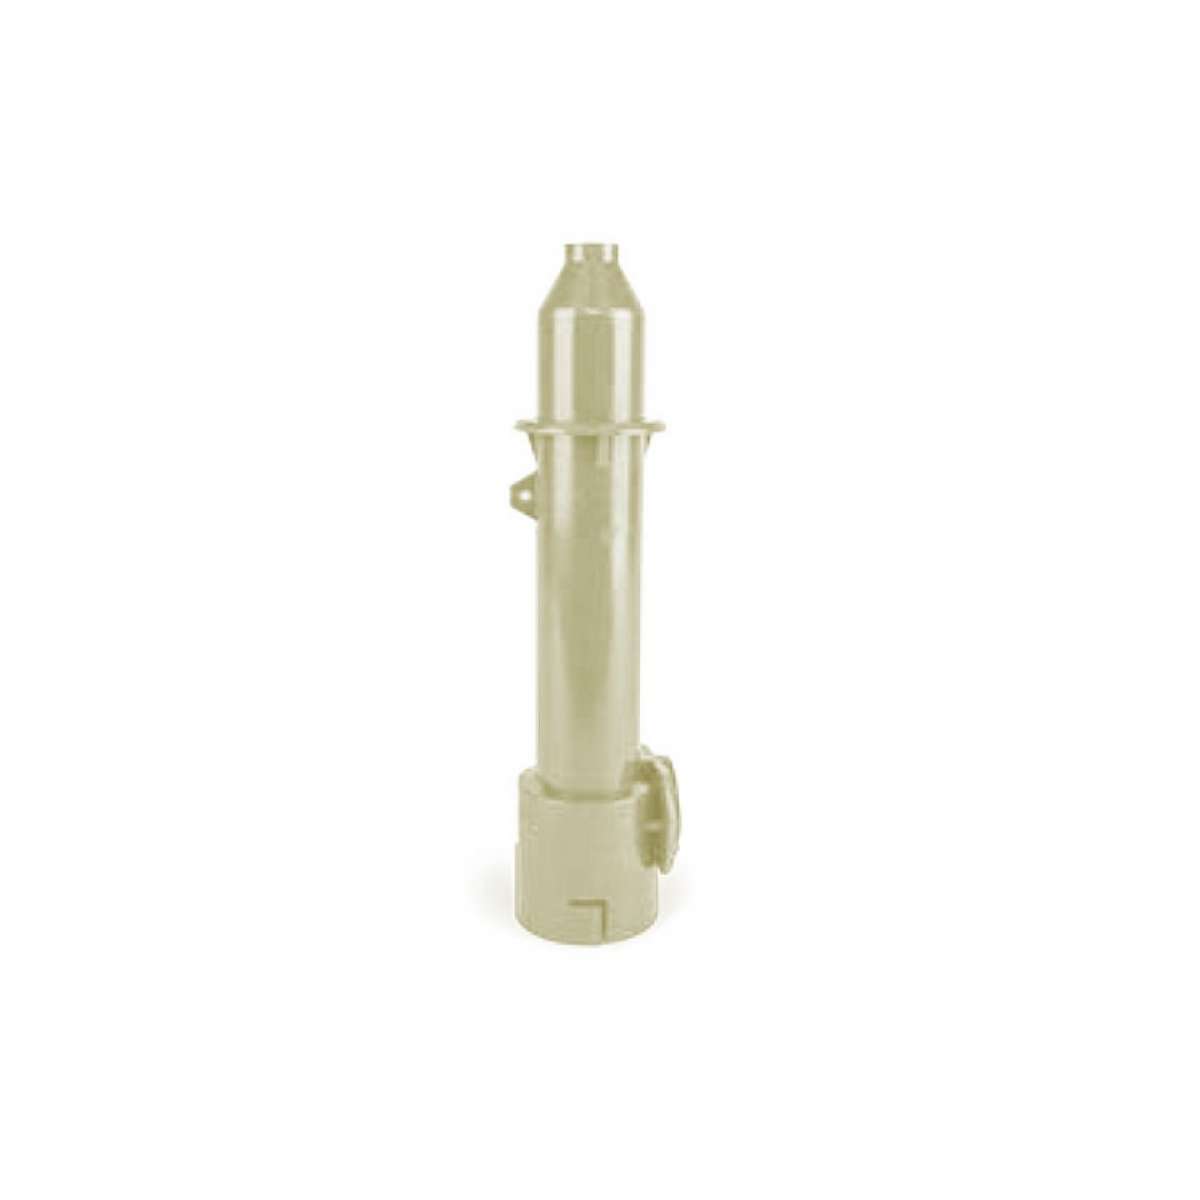 IsoLink 8" Rigid Spout with 1/2" Tip - Beige